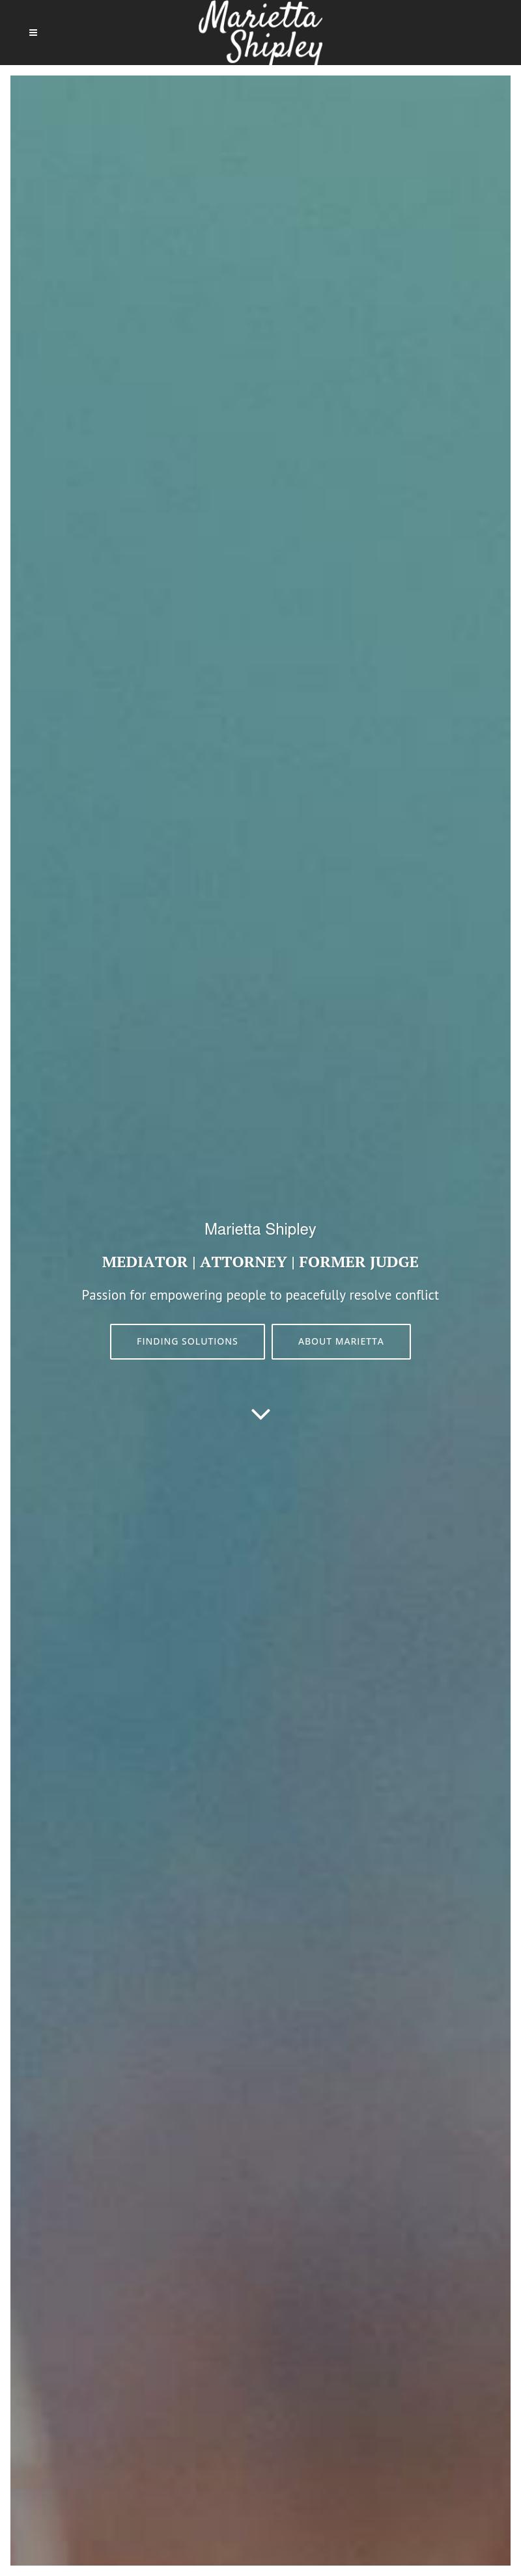 The Mediation Group Of Tennessee LLC - Nashville TN Lawyers